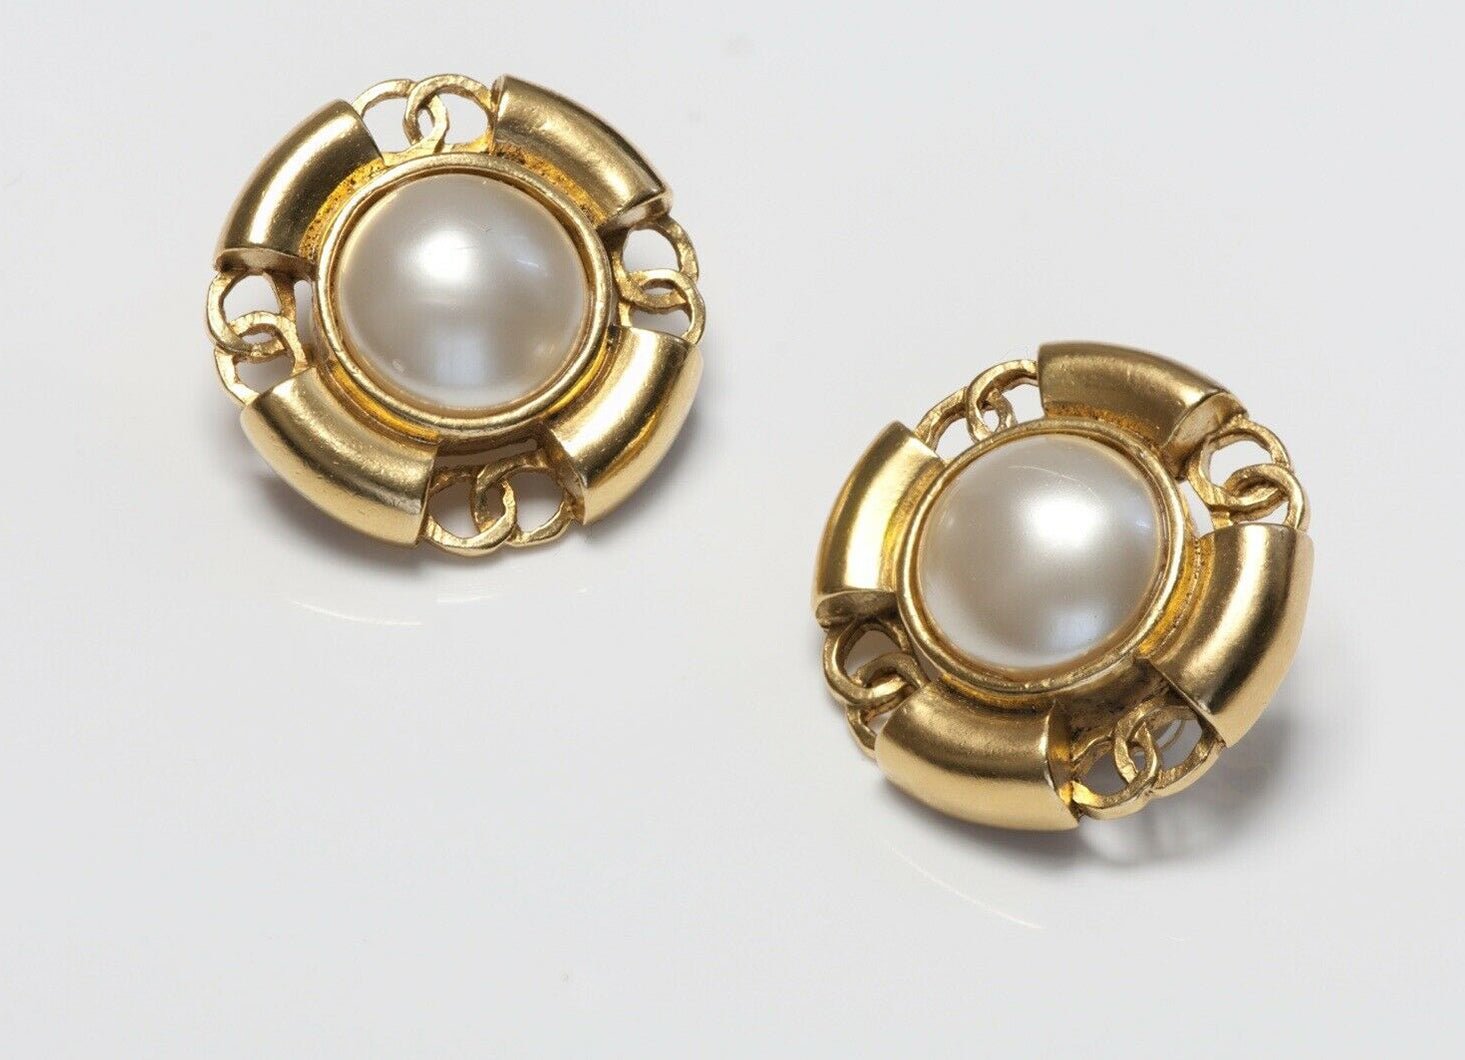 CHANEL Paris Spring 1994 Gold Plated CC Pearl Earrings